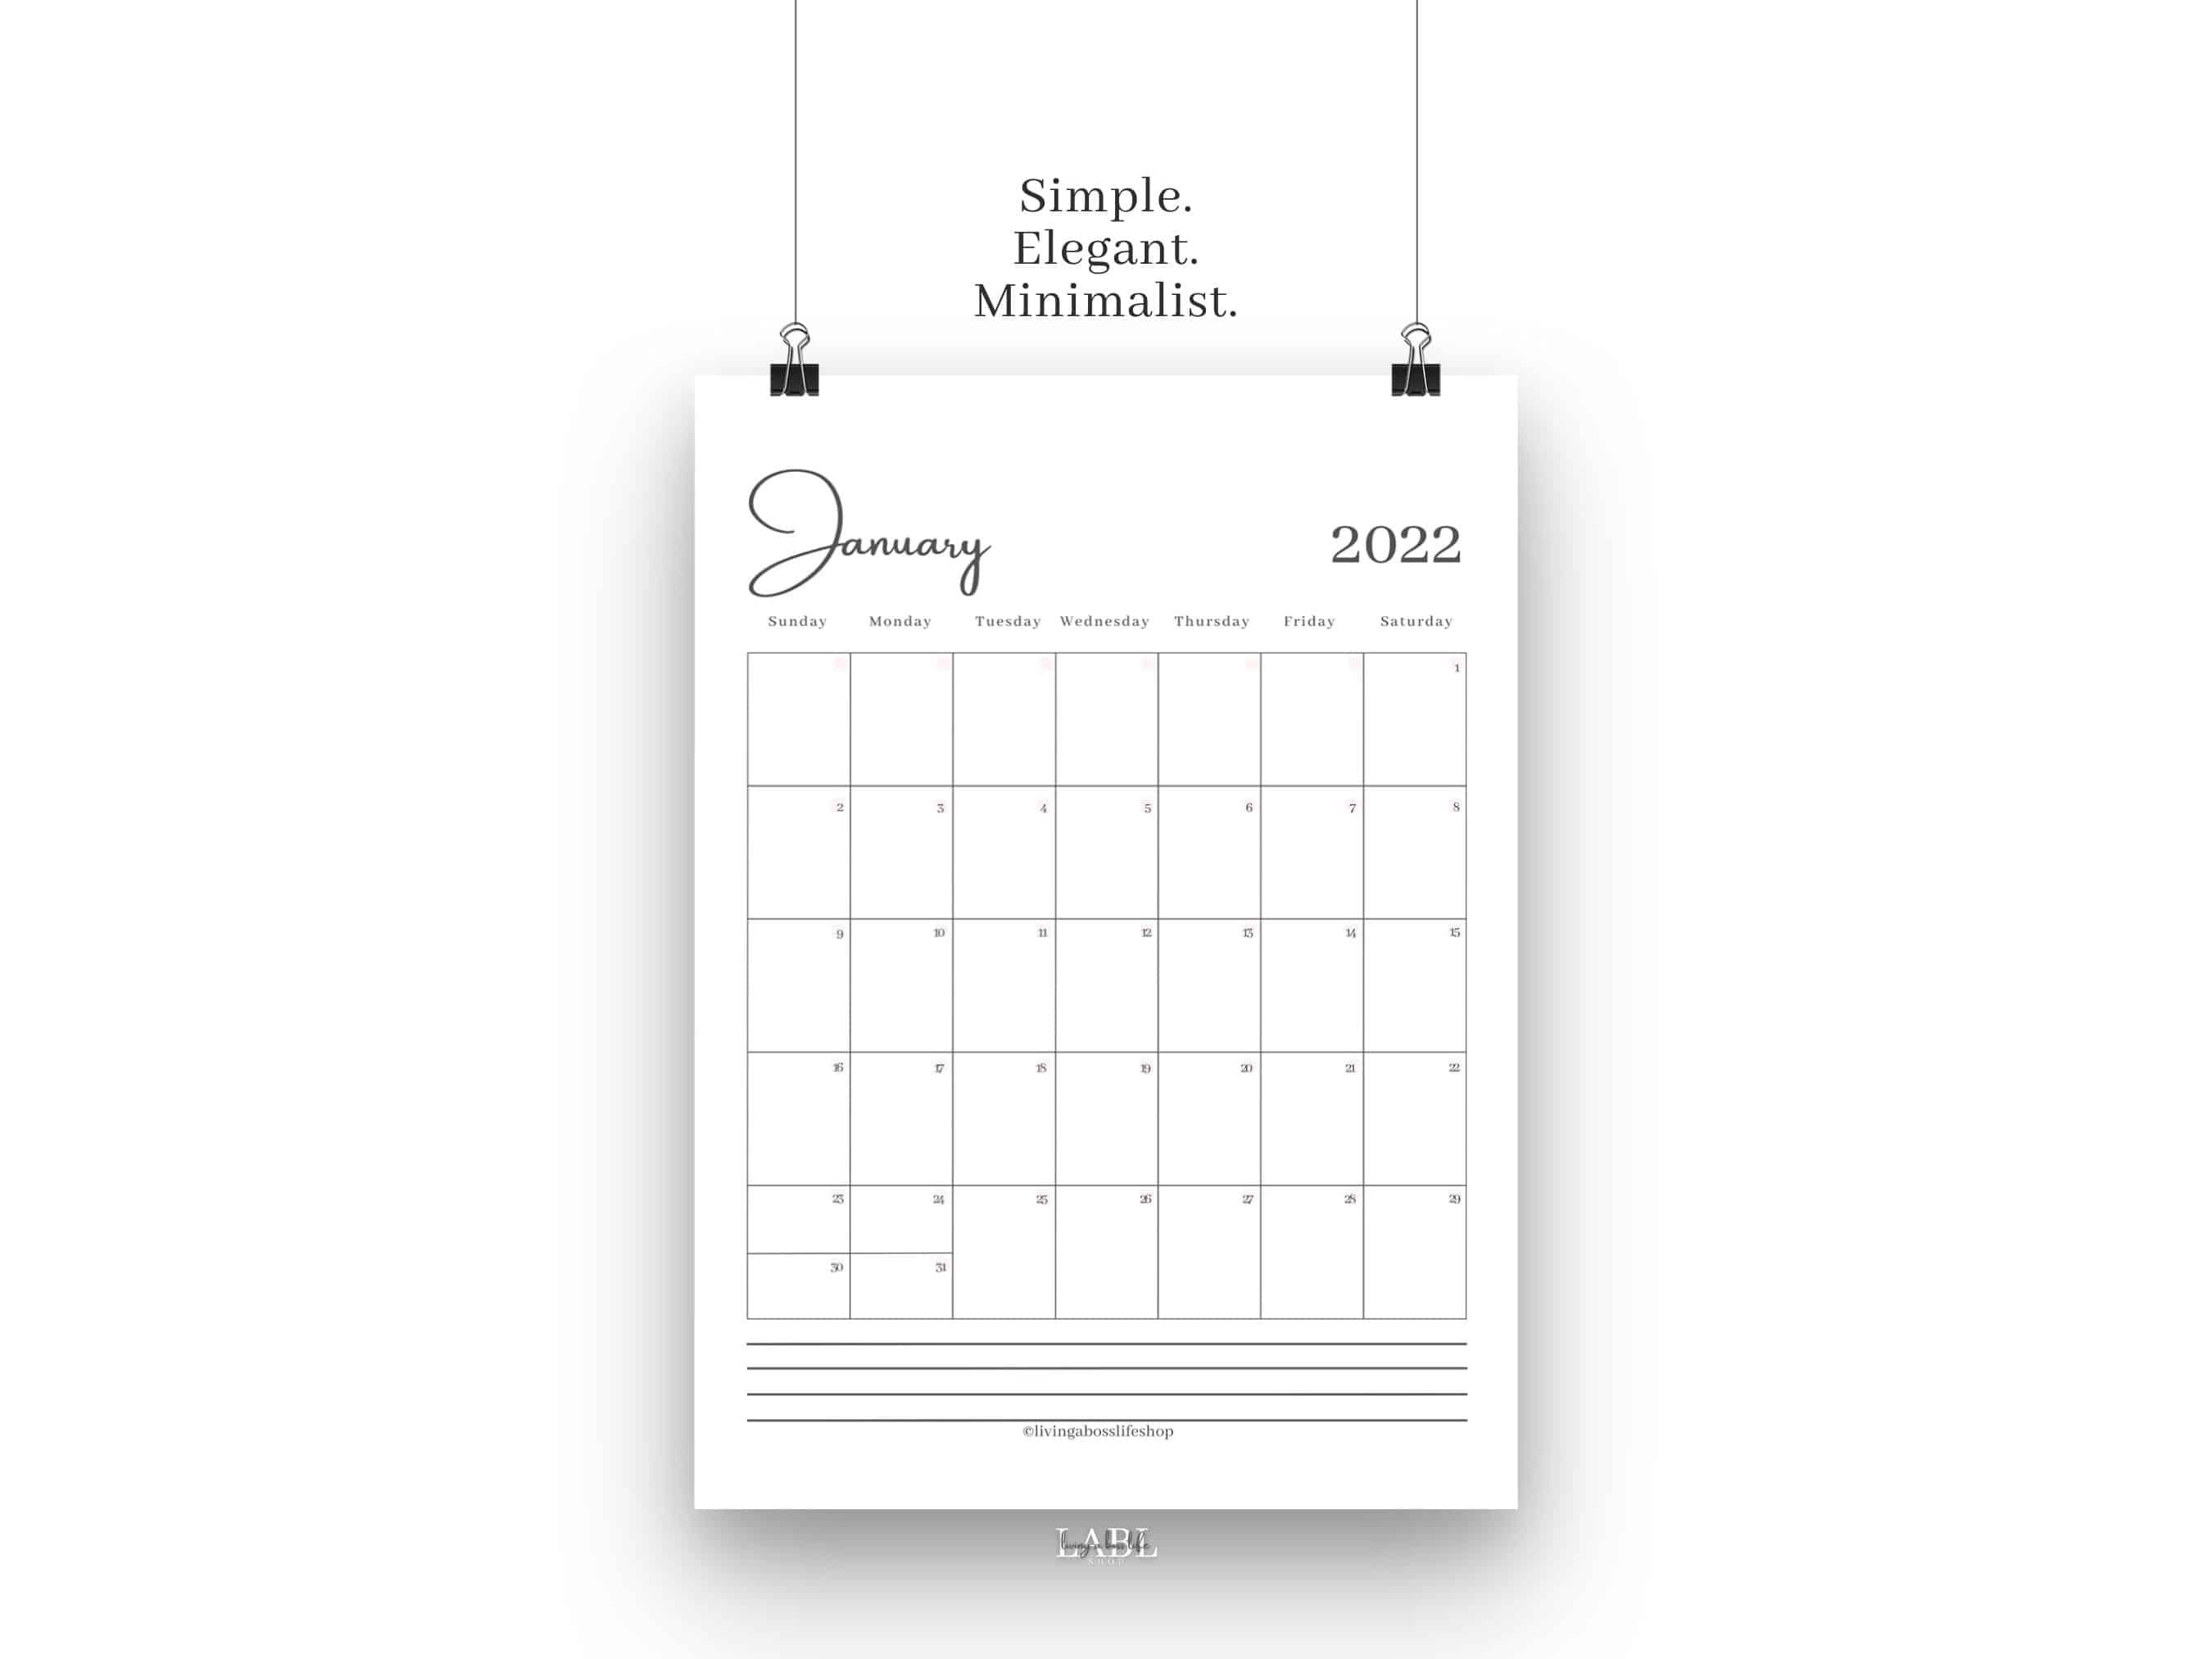 2022 Printable Monthly Calendar. This minimalistic monthly calendar has a touch elegance while maintaining simplicity. Printable monthly calendar and use as a digital calendar with your favourite device! #PrintableCalendar #2022PrintableCalendar #2022MonthlyCalendar #2022PrintableMonthlyCalendar #2022DigitalMonthlyCalendar 